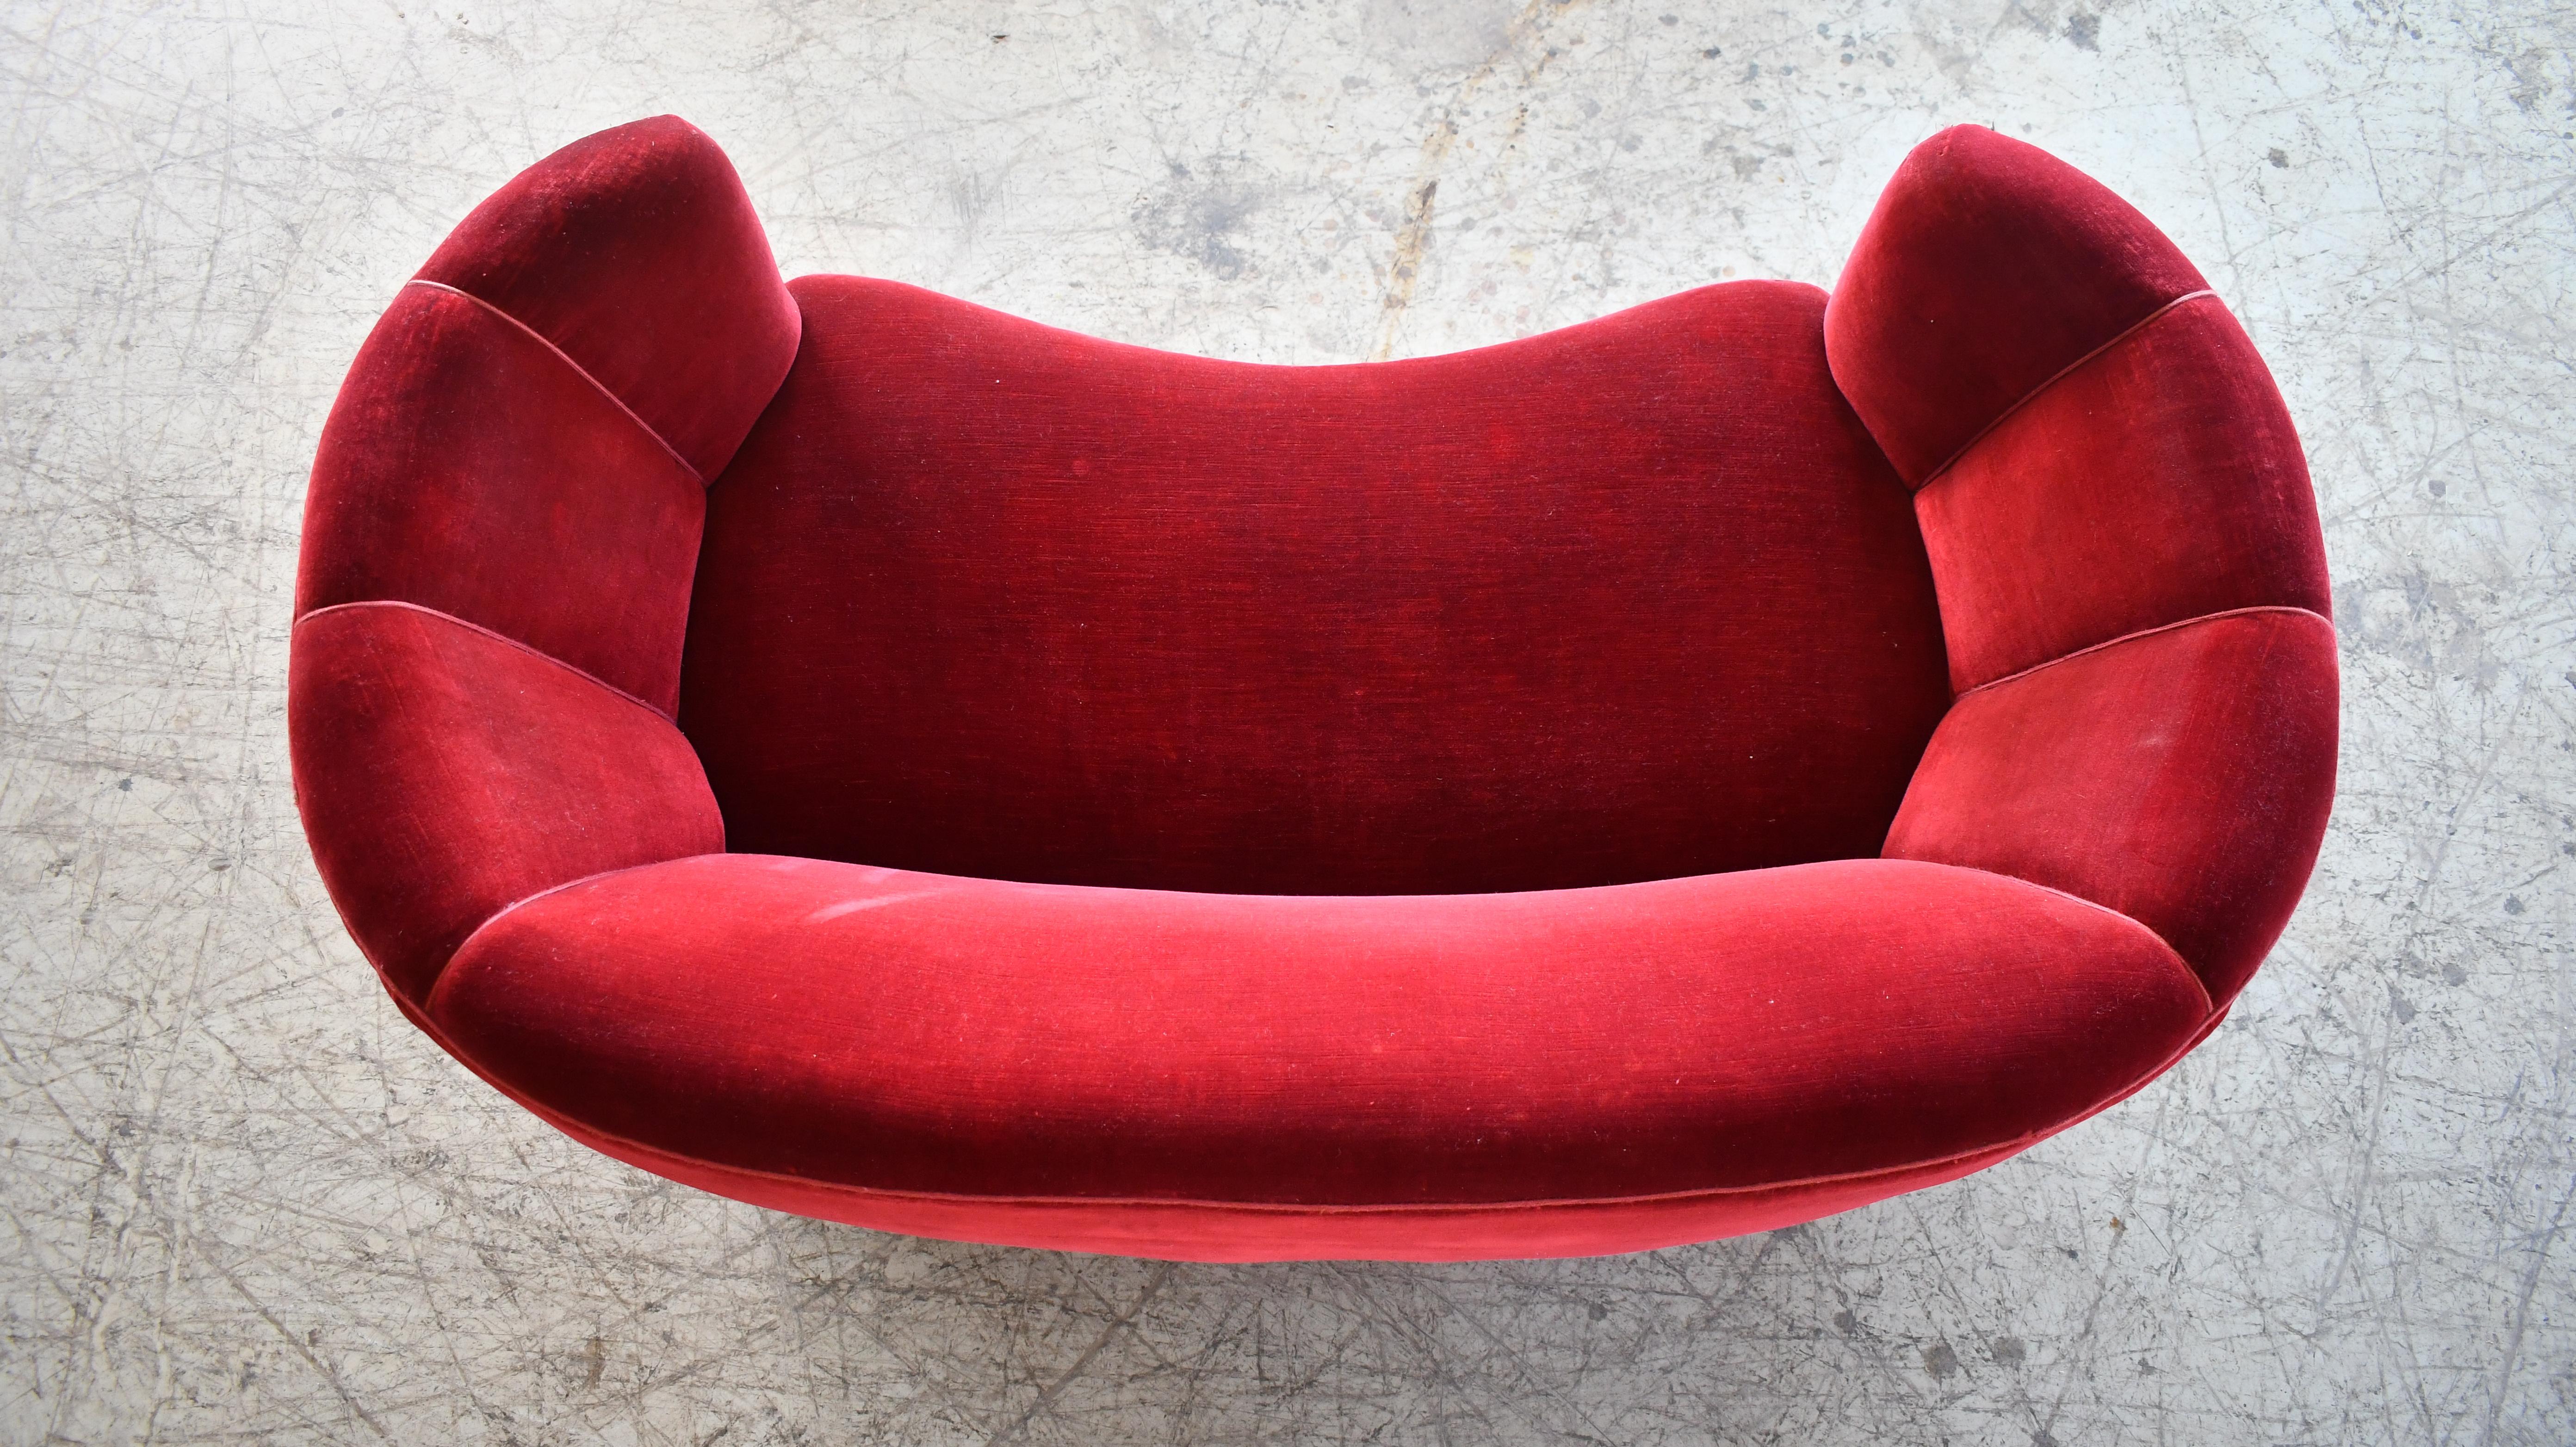 Mid-20th Century Curved Banana Shape Loveseat or Sofa in Two-Tone Wool, Denmark, 1940s For Sale